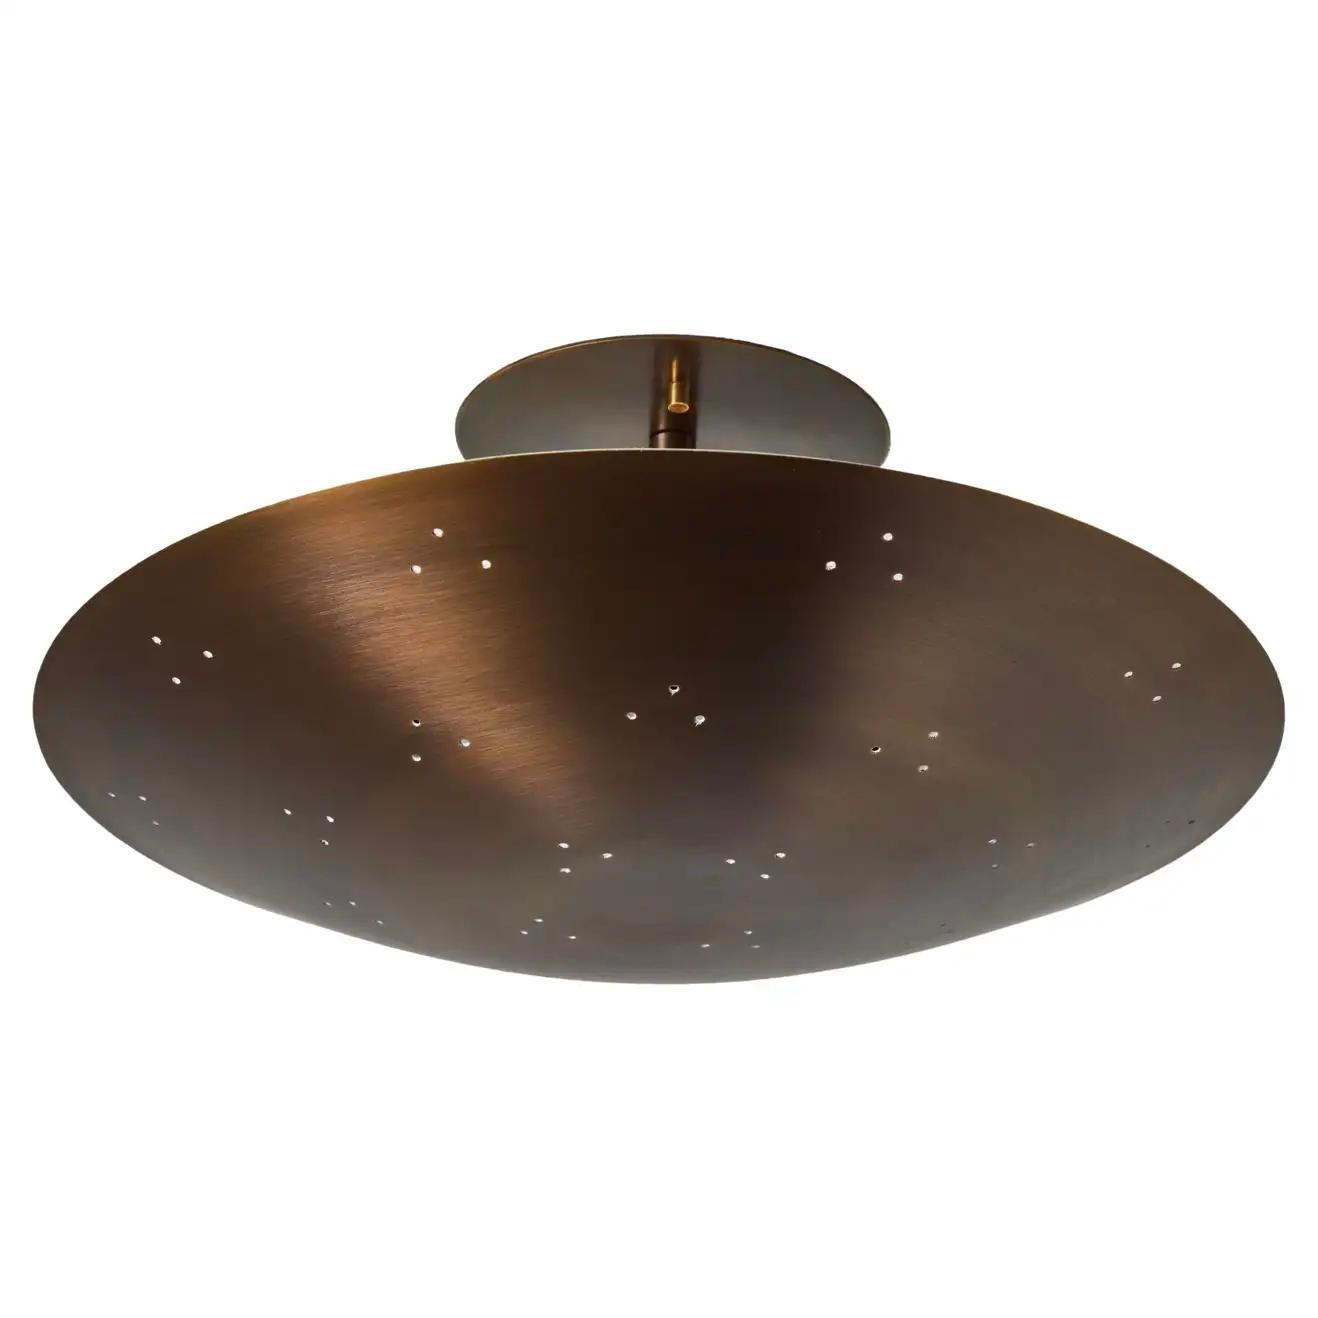 Two Enlighten 'Rey' Perforated Metal Dome Ceiling Lamp in Black For Sale 4